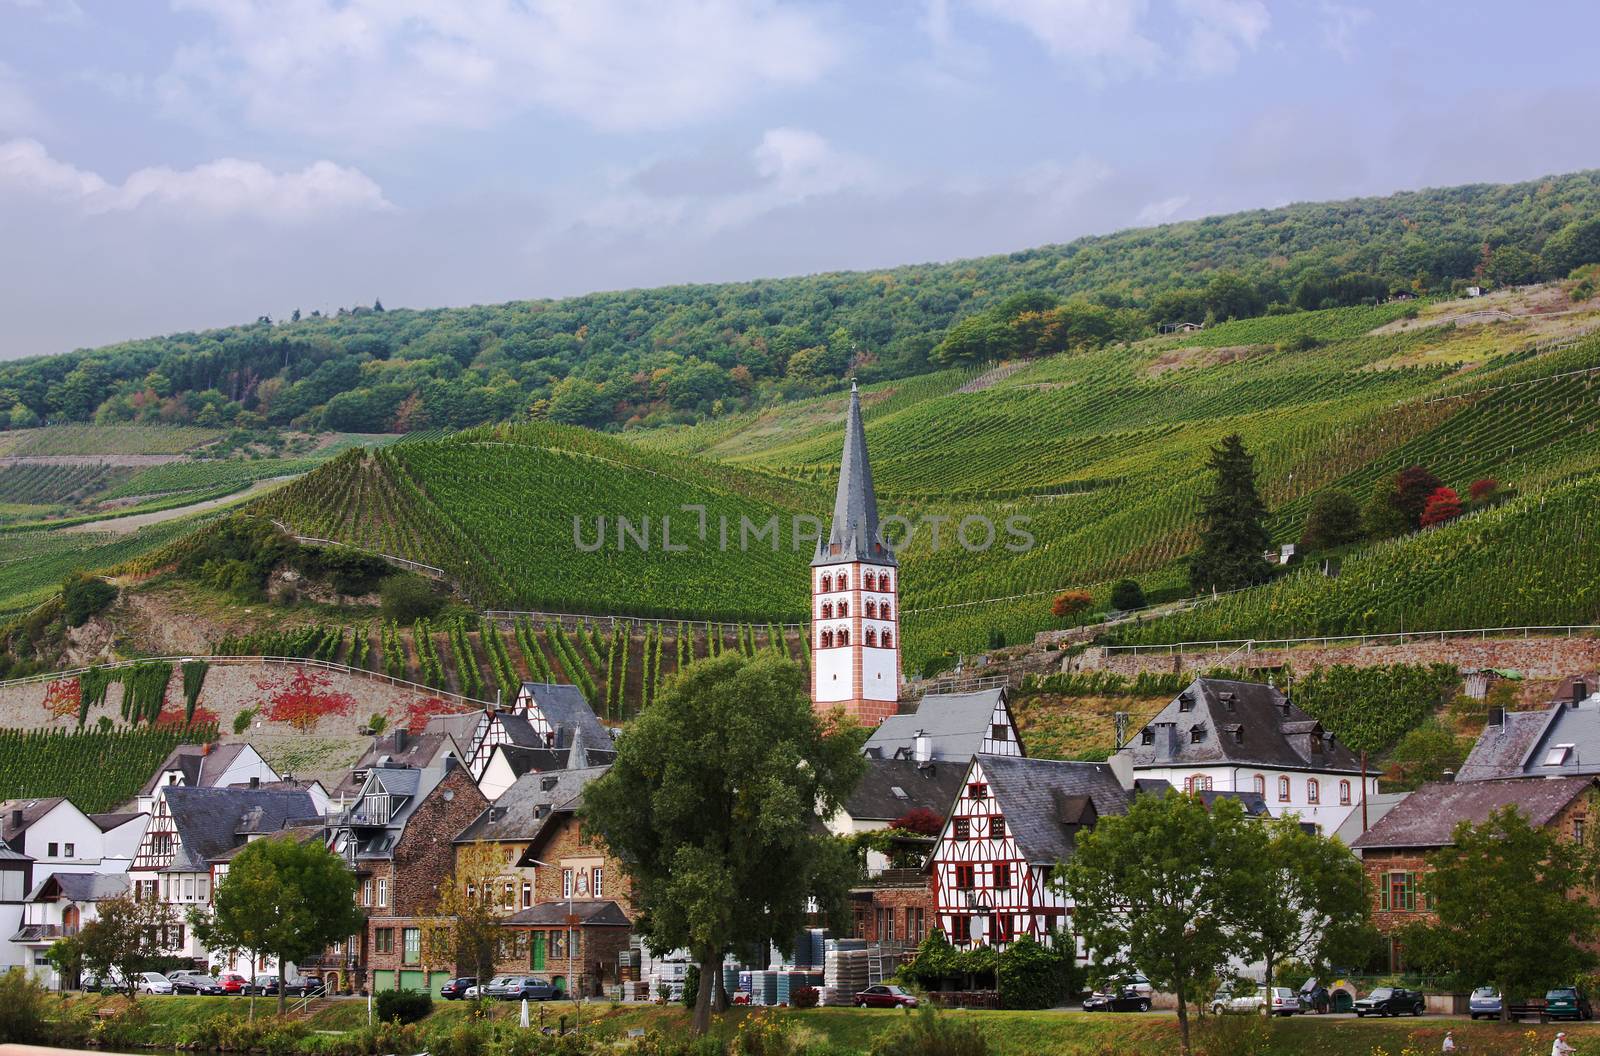 On the banks of the Mosel river,Germany by borisb17